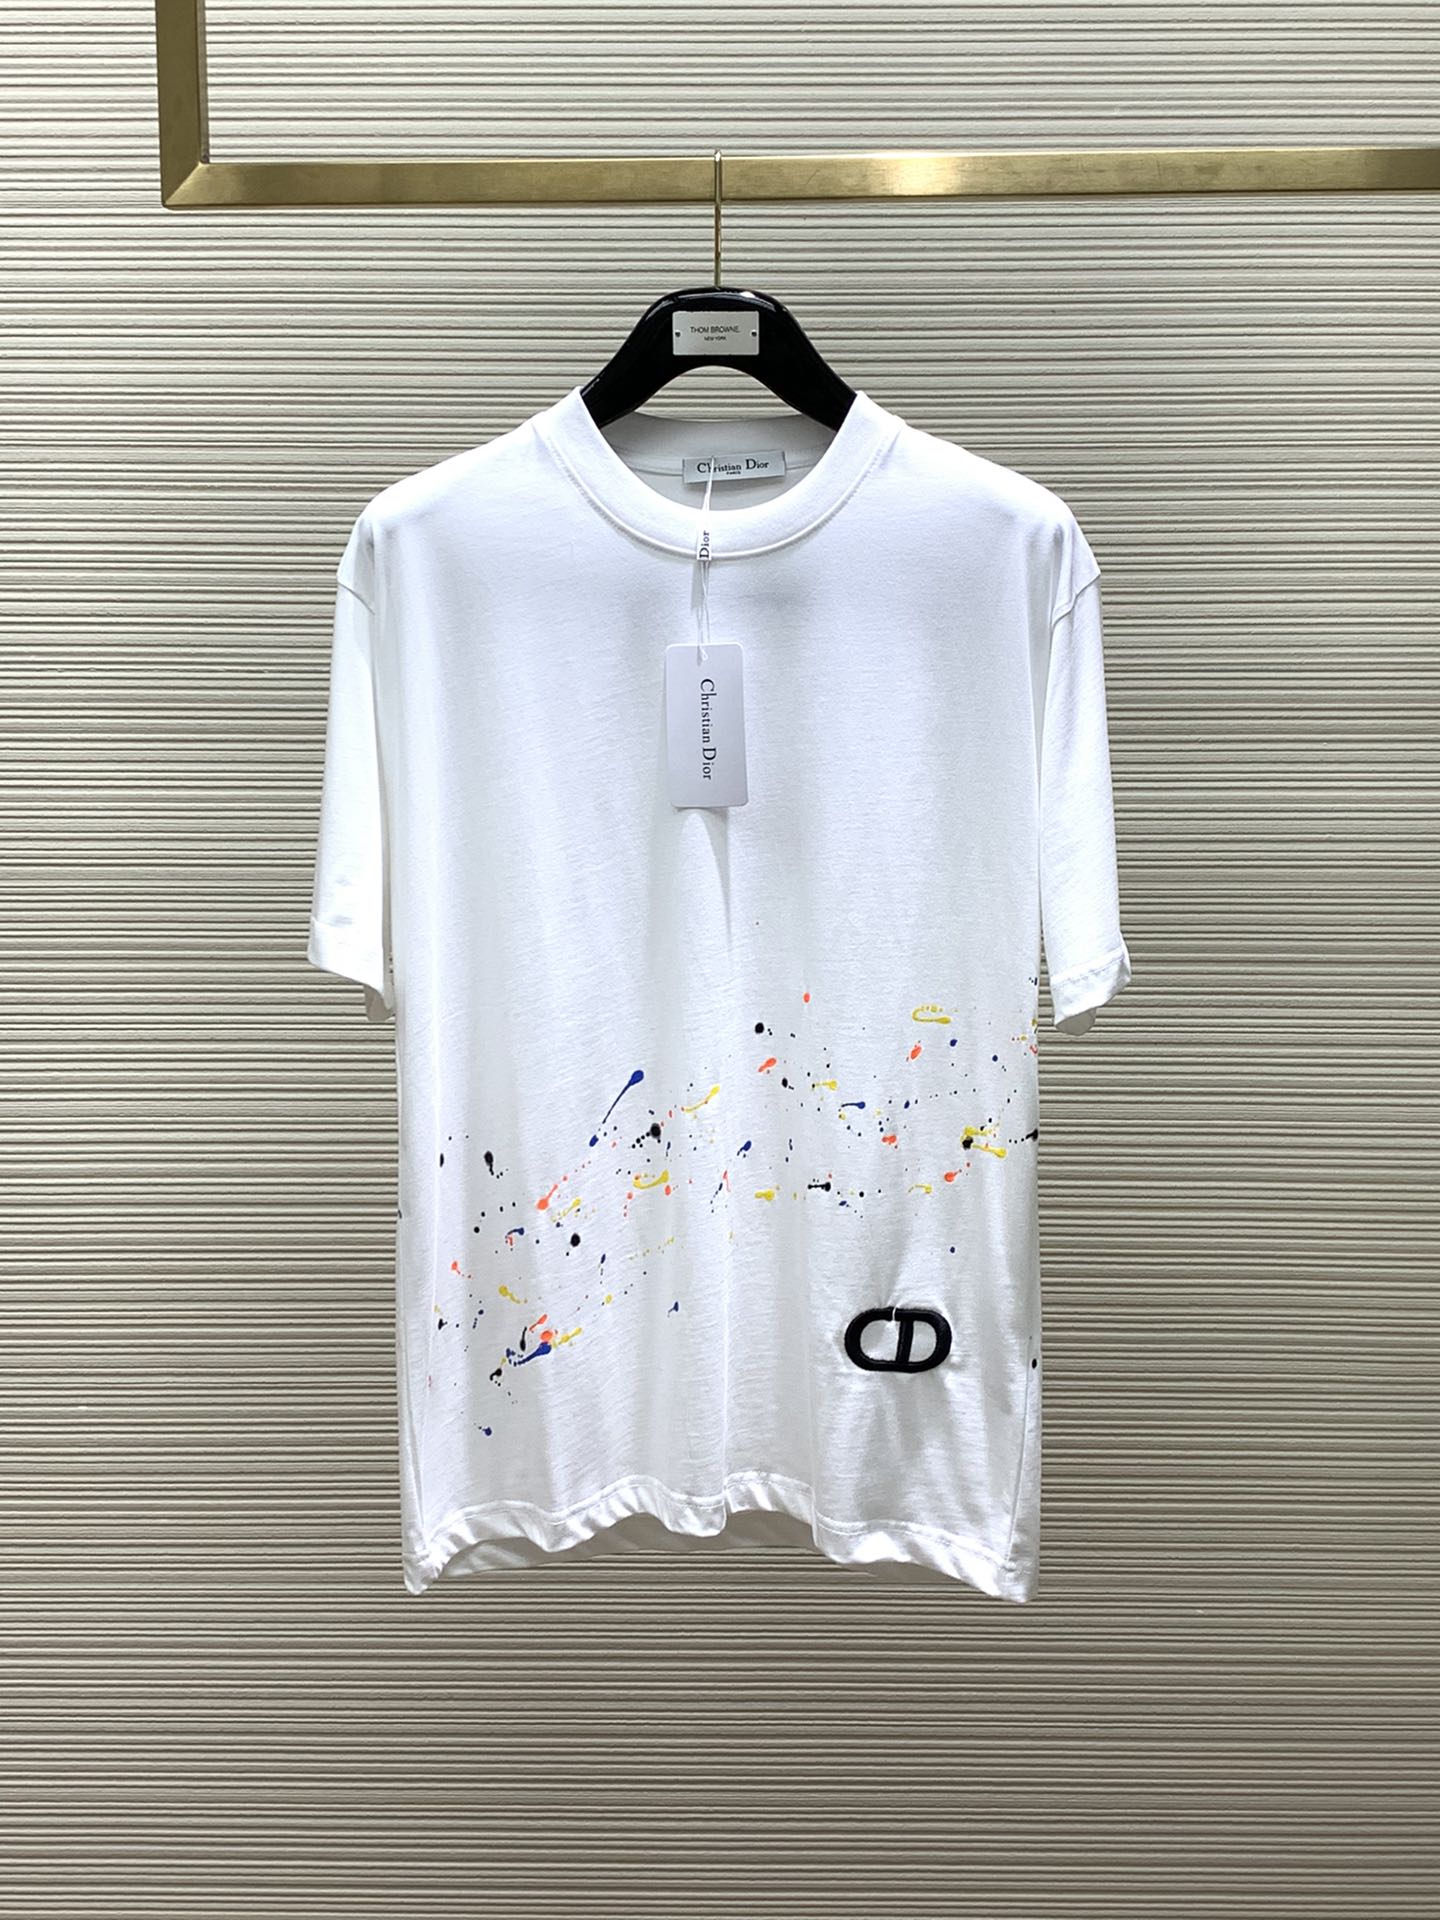 Dior Clothing T-Shirt Embroidery Spring/Summer Collection Fashion Short Sleeve